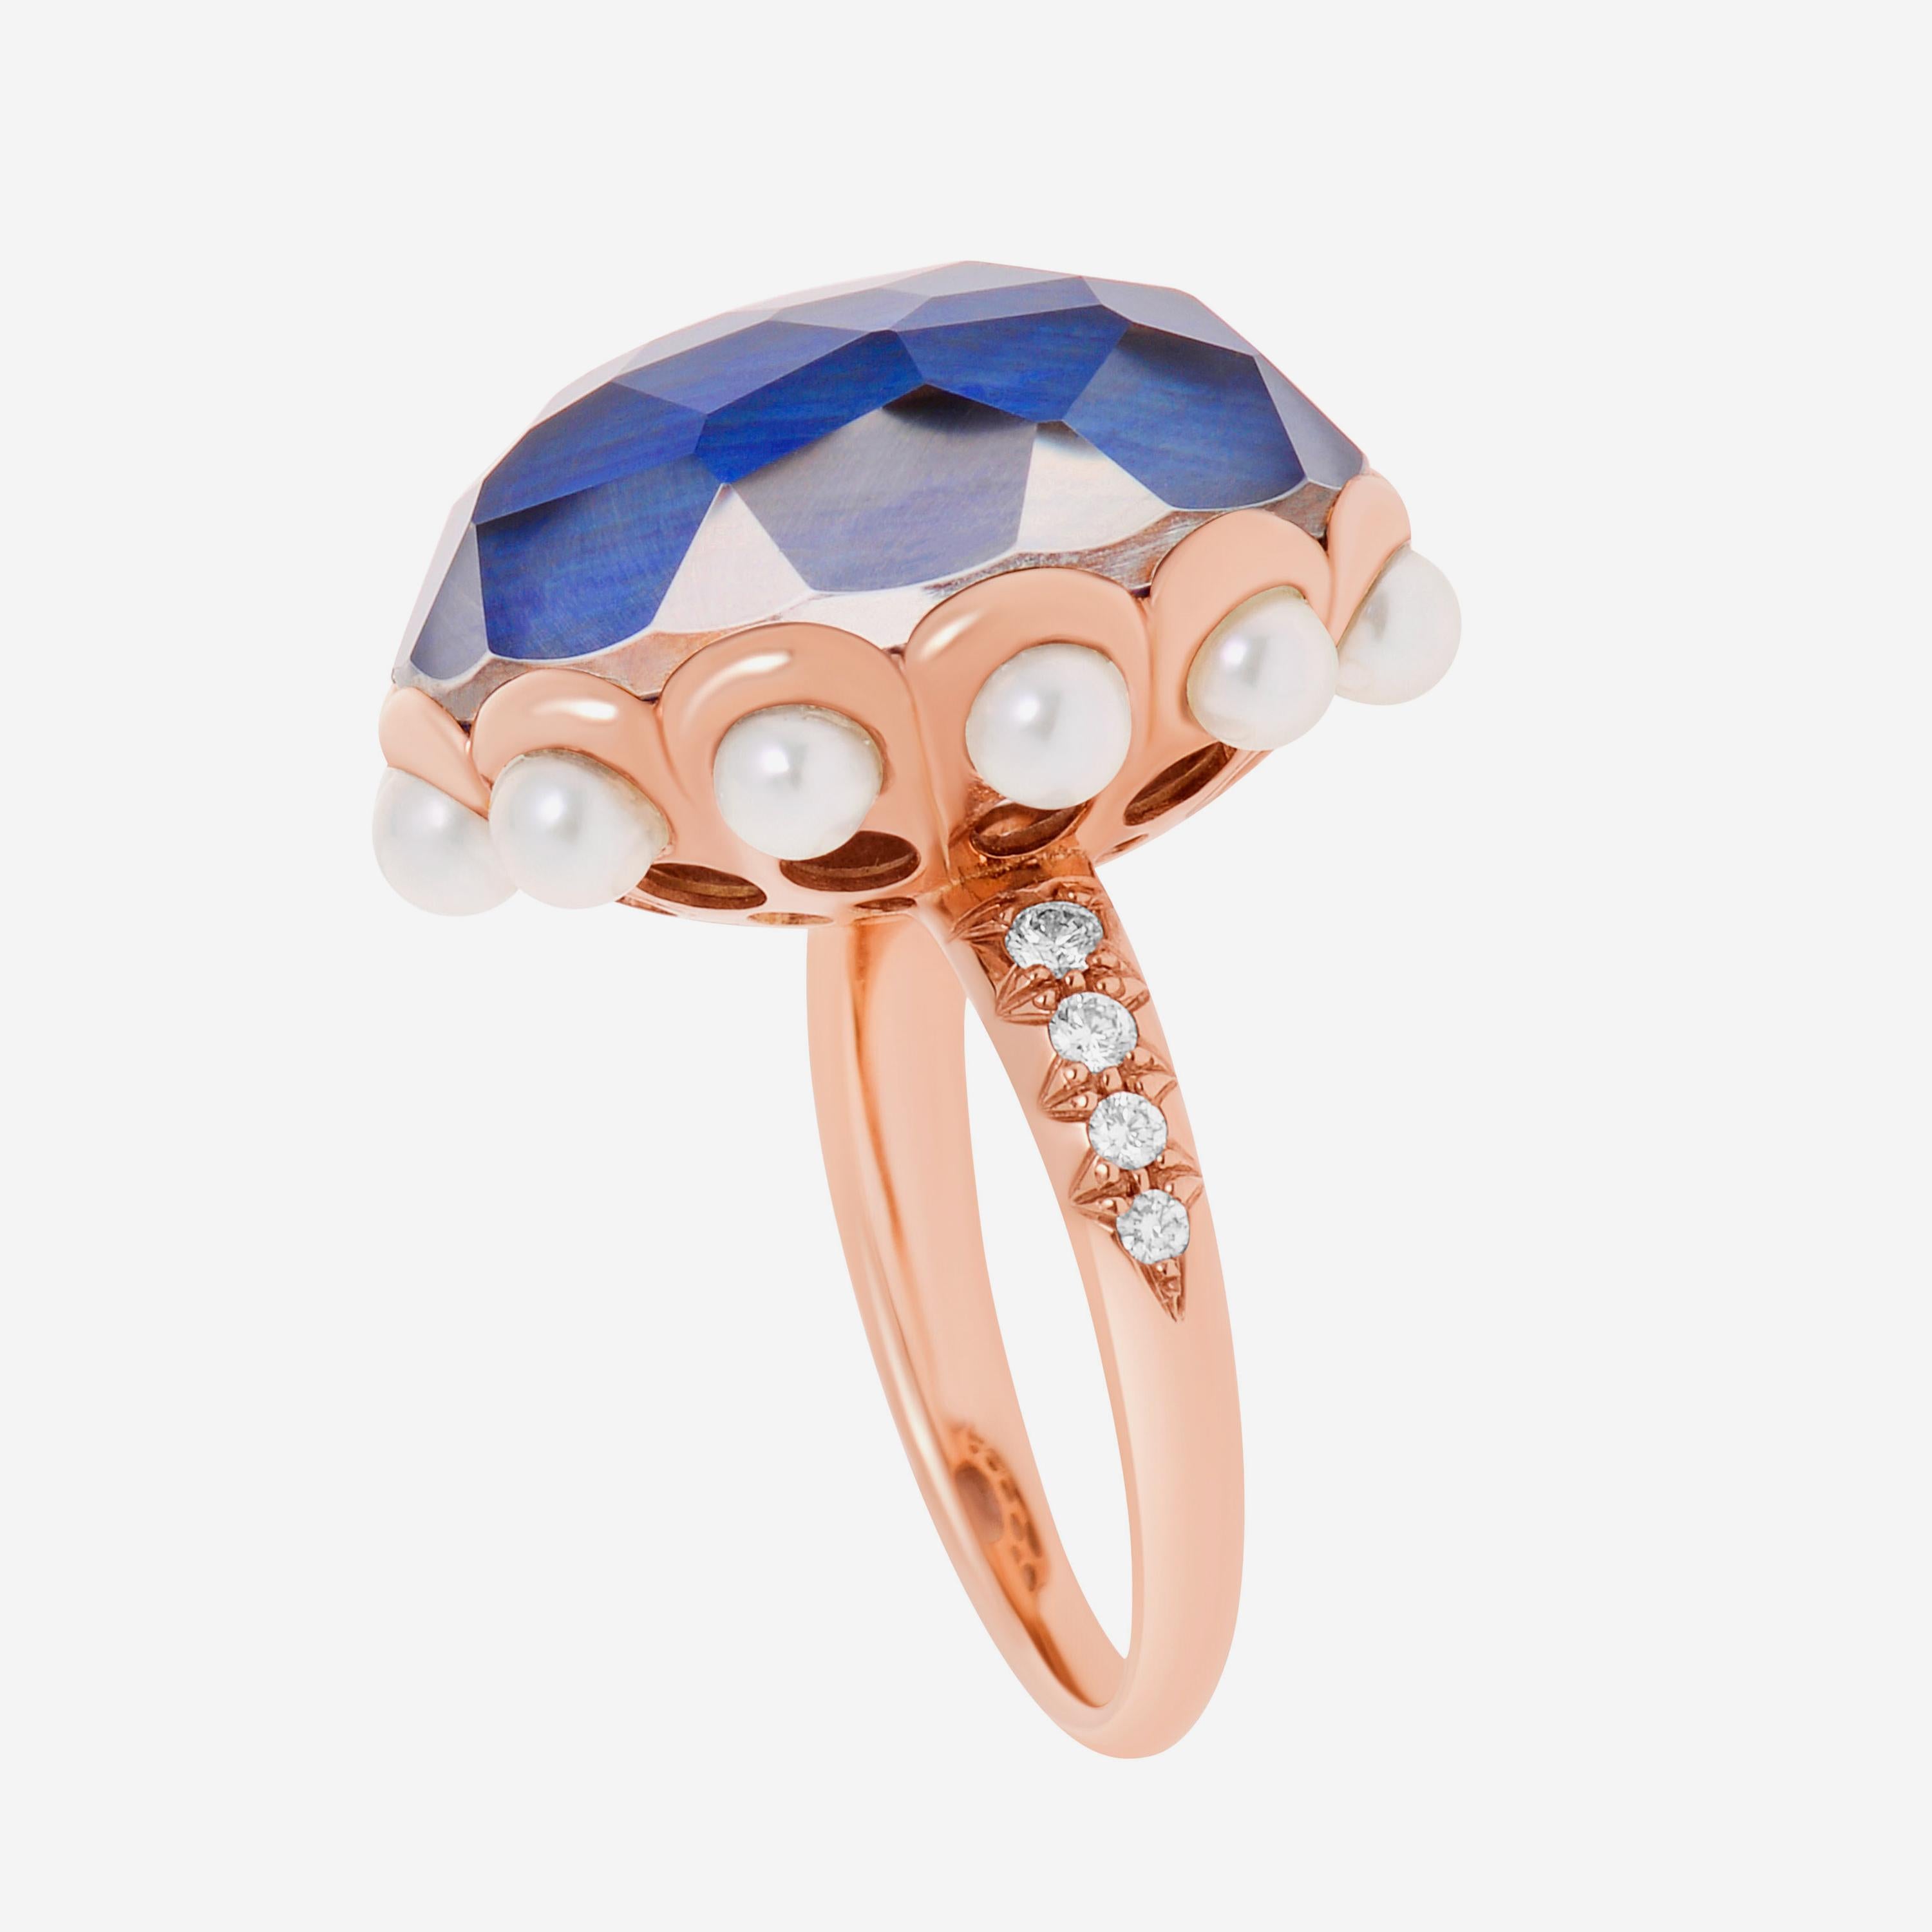 Contemporary Mimi Milano Belle 18K Rose Gold Rock Crystal and Mother of Pearl Ring sz 6.5 For Sale